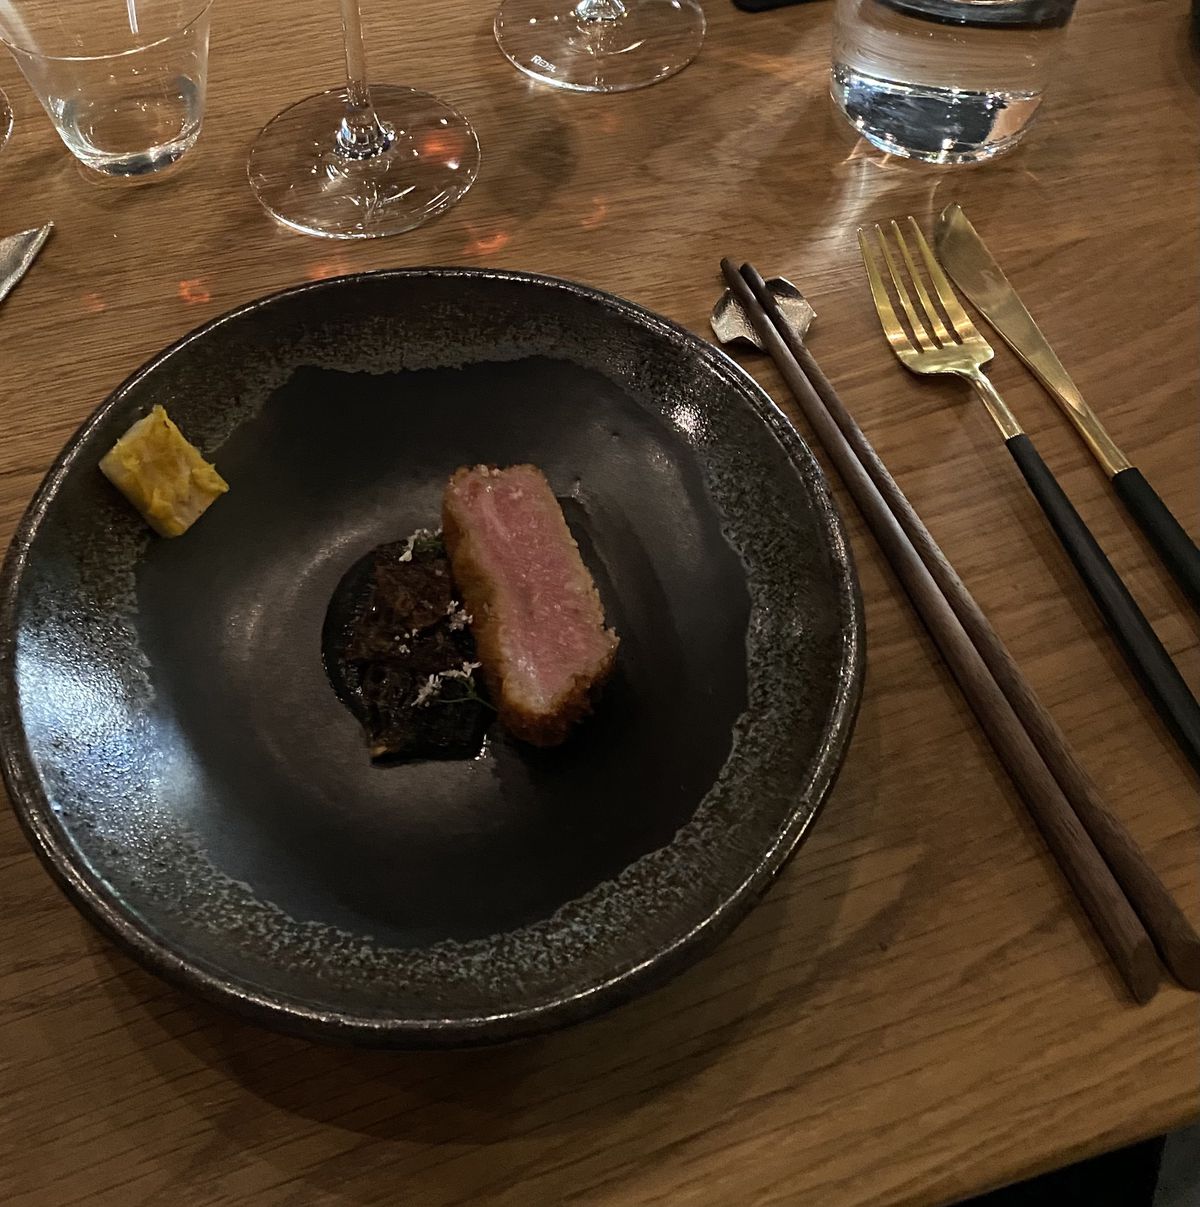 A piece of A5 wagyu beef with a black pool of curry and local morel mushrooms.